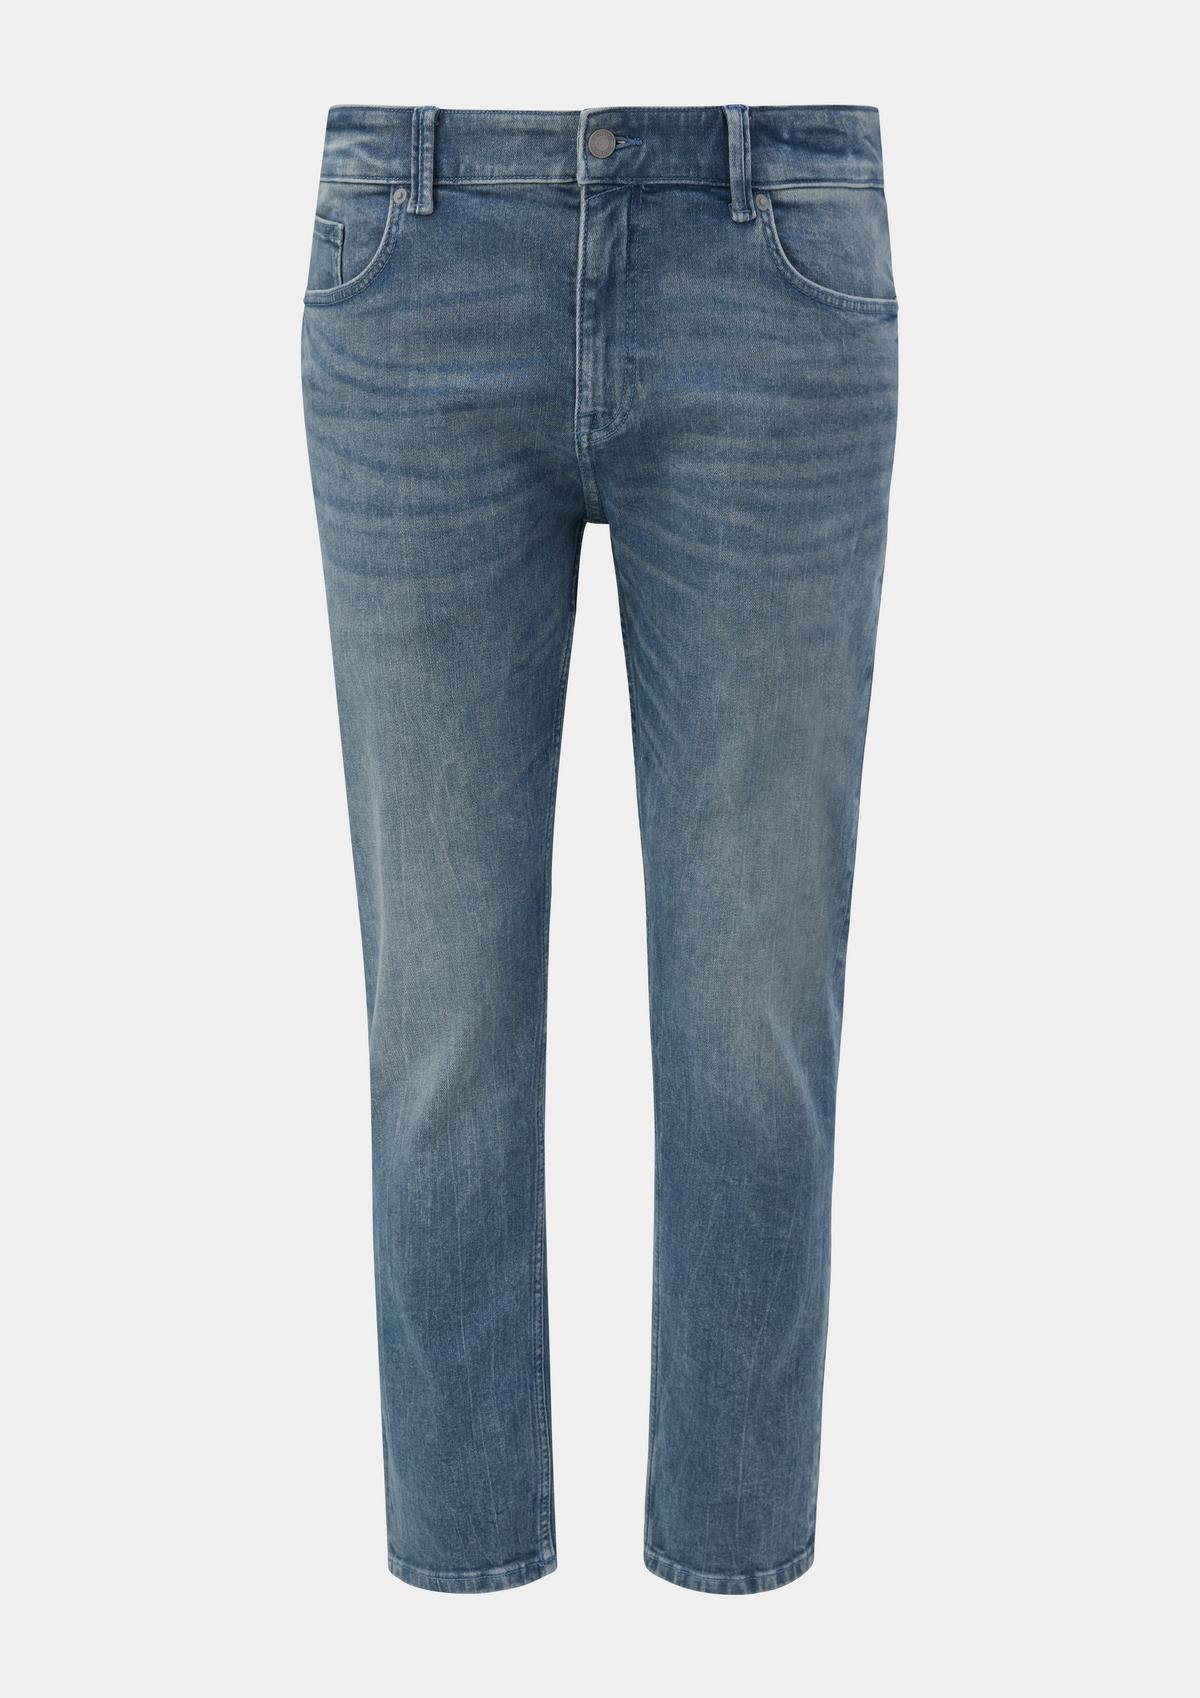 s.Oliver Jeans Cosby / Relaxed Fit / Mid Rise / Straight Leg